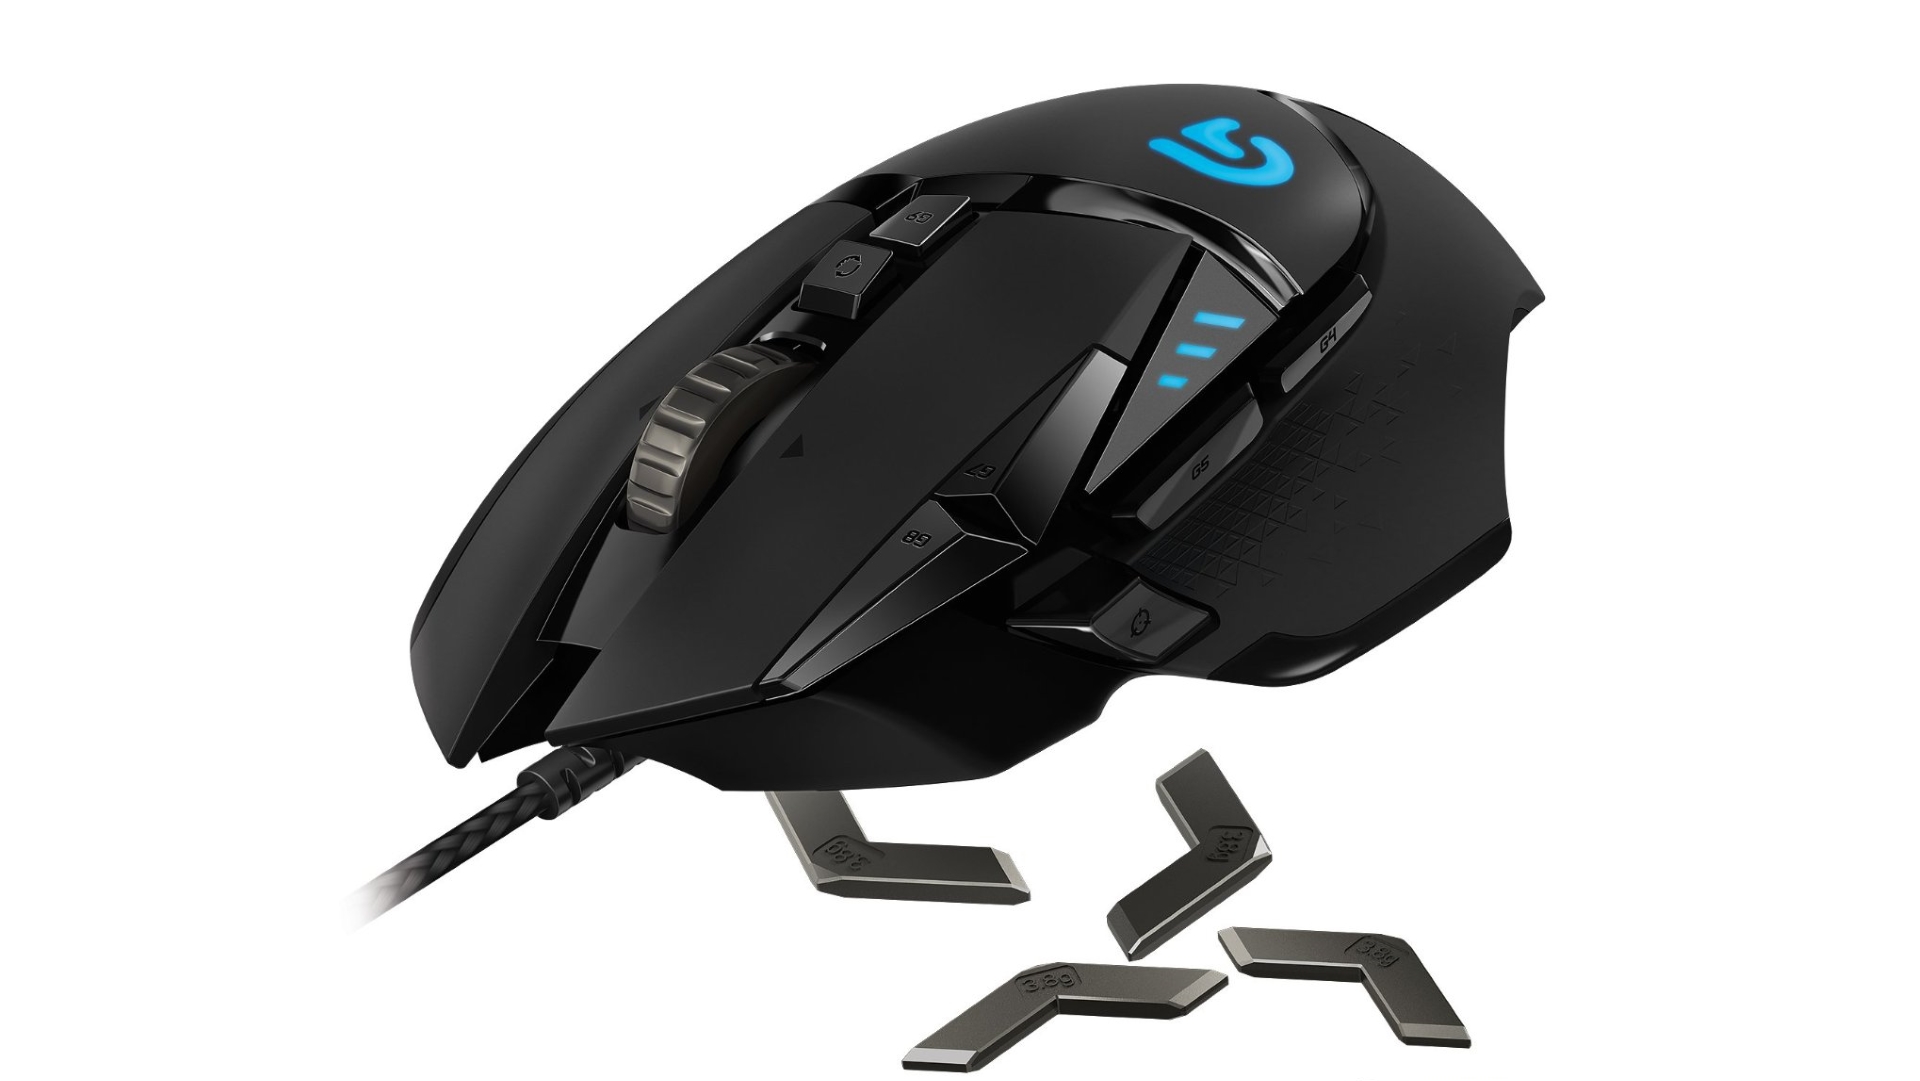 One of our favourite Logitech gaming mice is over 50% off this Black